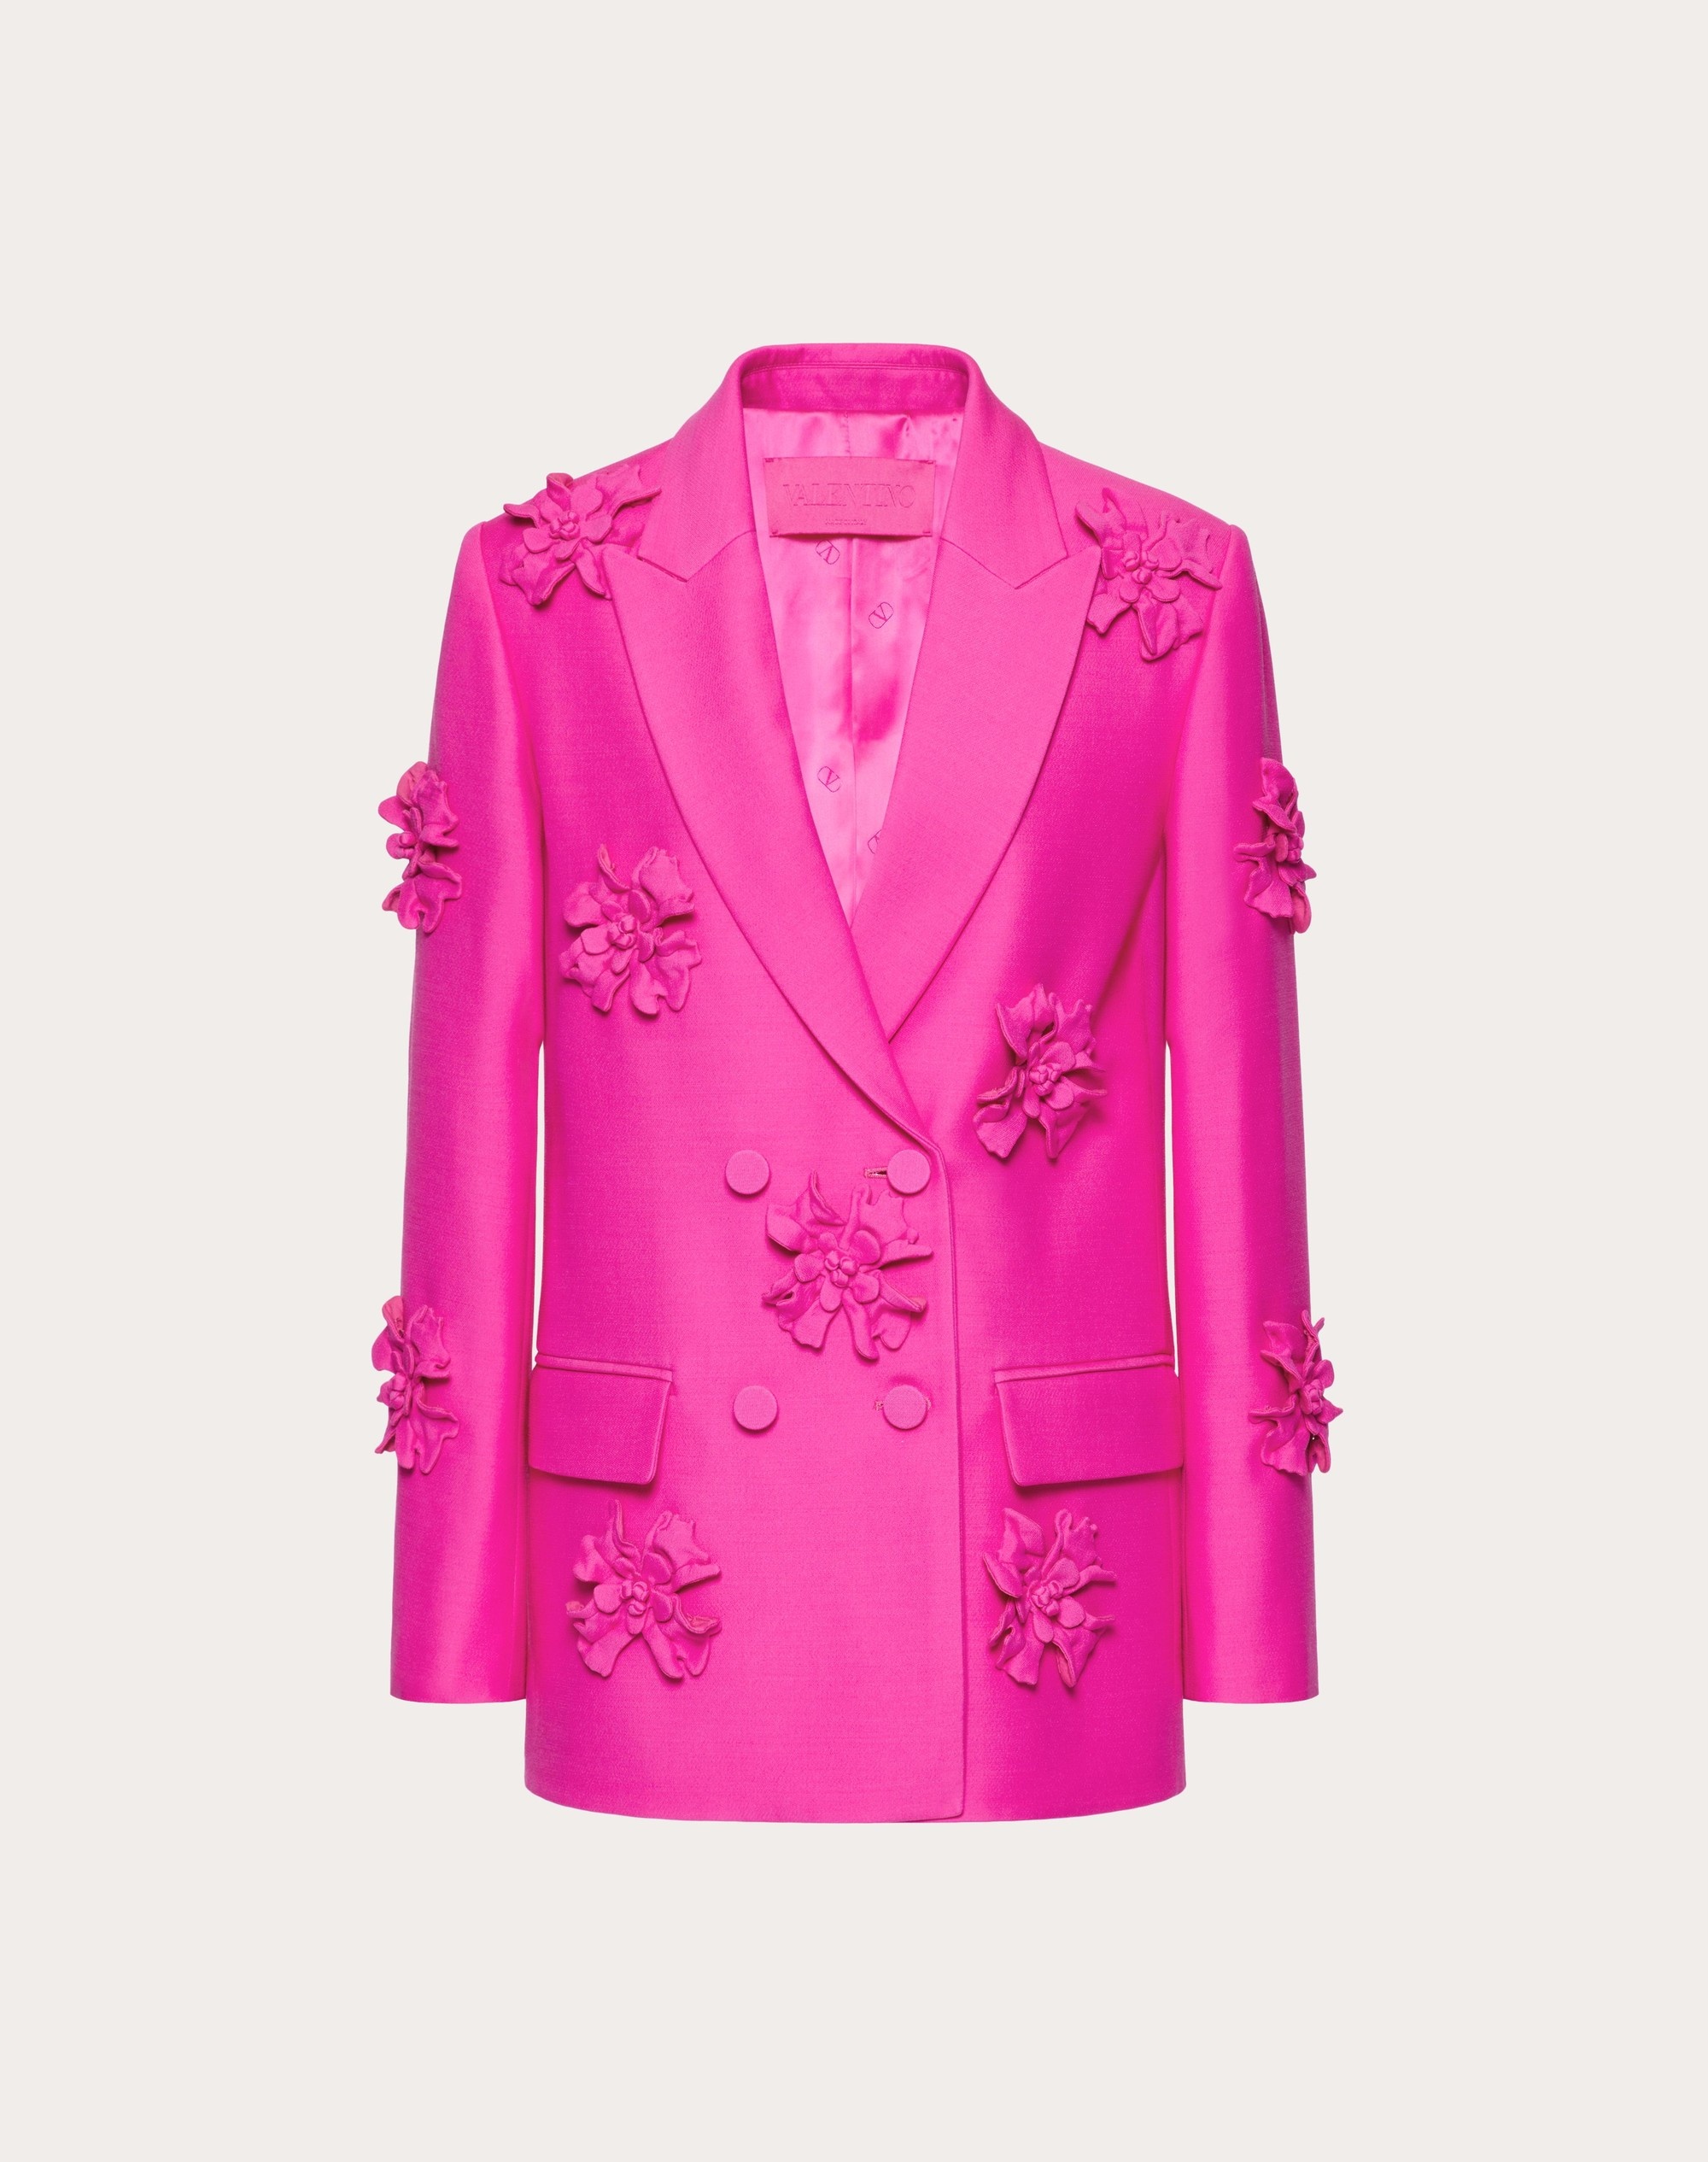 CREPE COUTURE BLAZER WITH FLORAL EMBROIDERY - 1